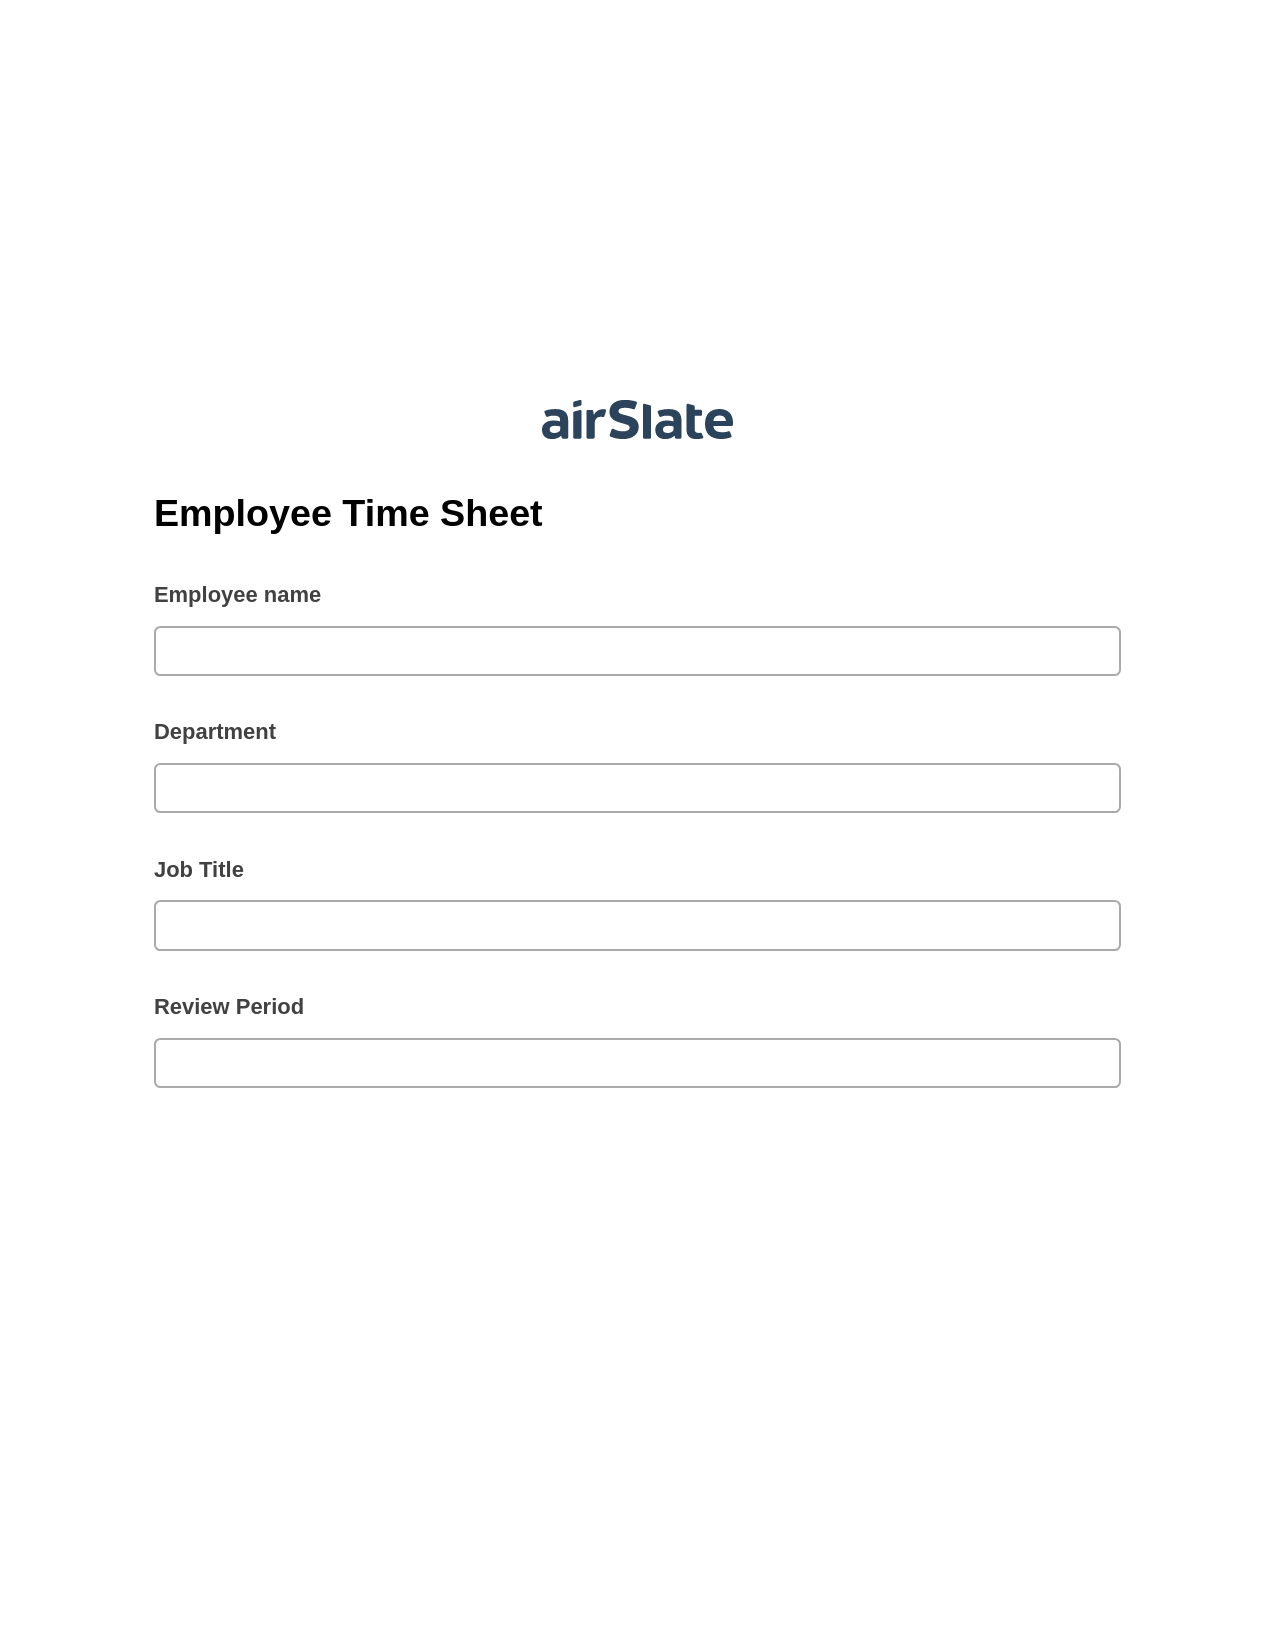 Multirole Employee Time Sheet Pre-fill Dropdowns from CSV file Bot, Create slate addon, Archive to Dropbox Bot